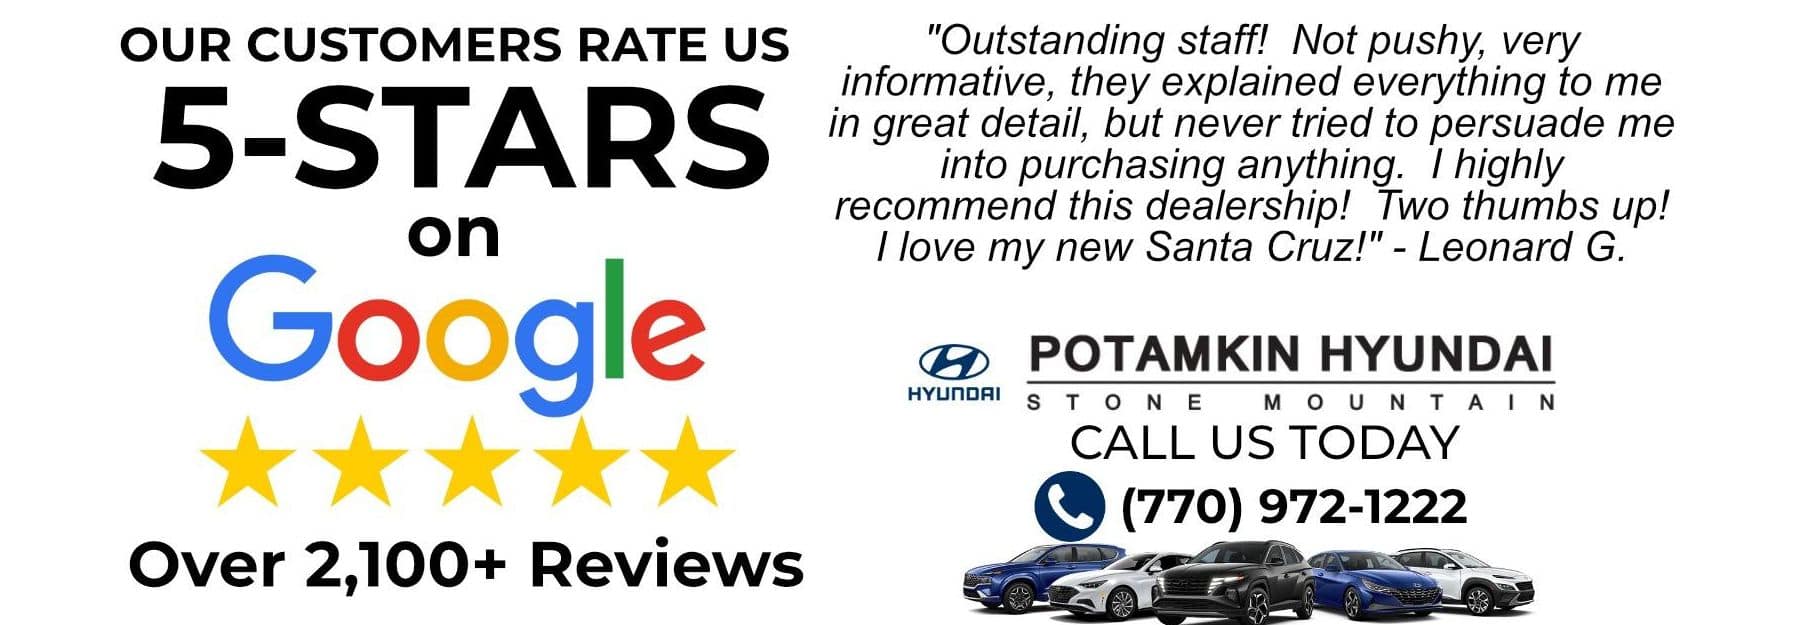 Our Customers Rate Us 5 Stars on Google - 1